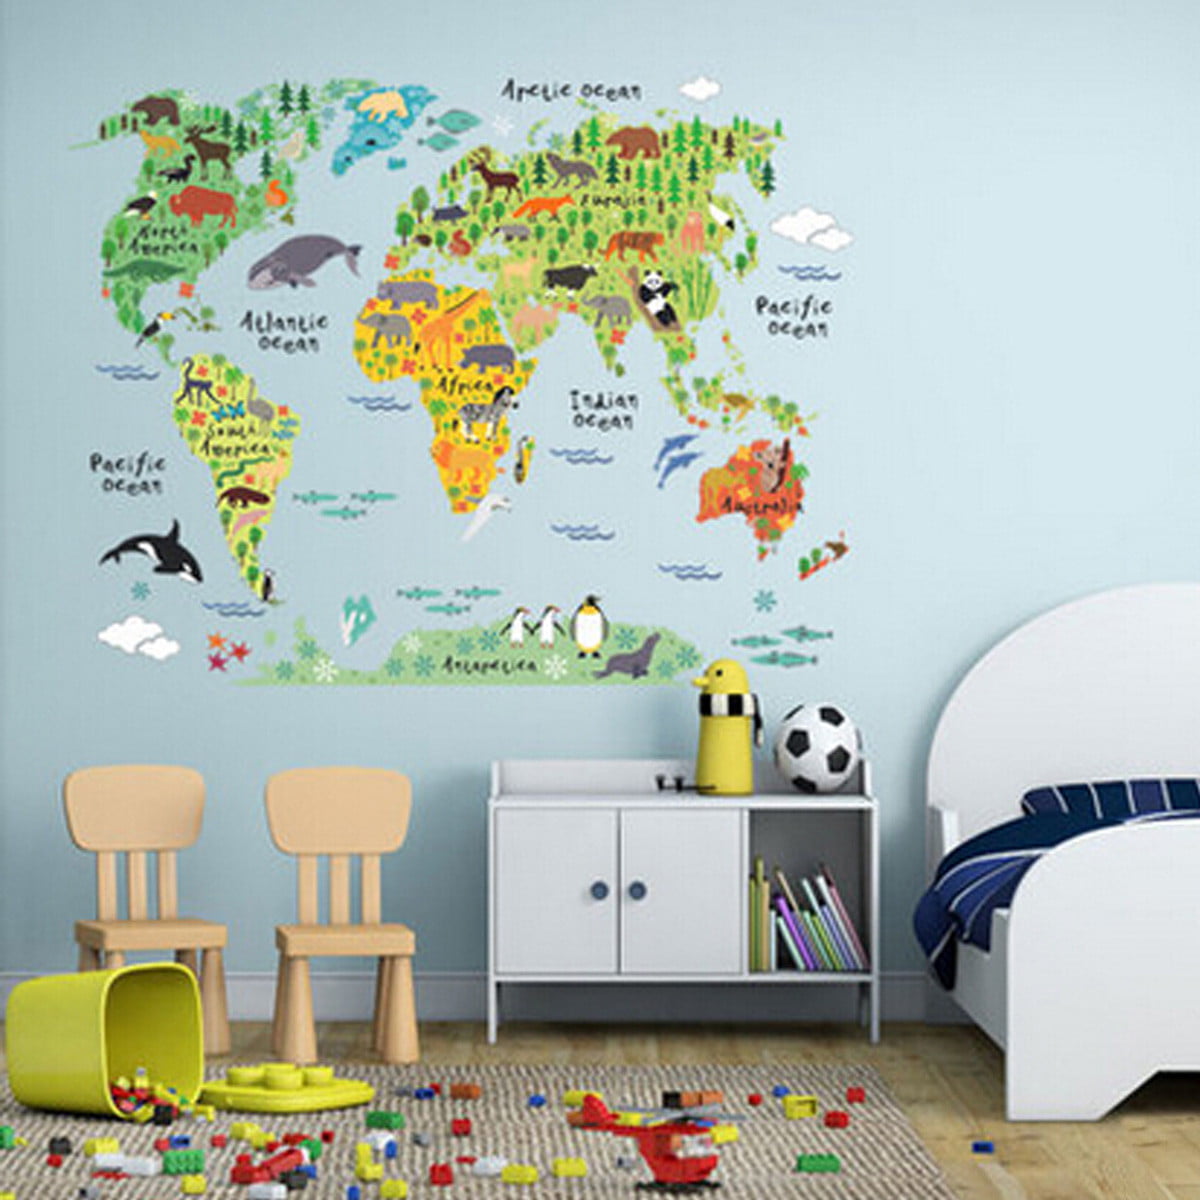 WORLD MAP Wall Sticker Art Decal Vinyl Decor Home Bedroom Office Countries Words